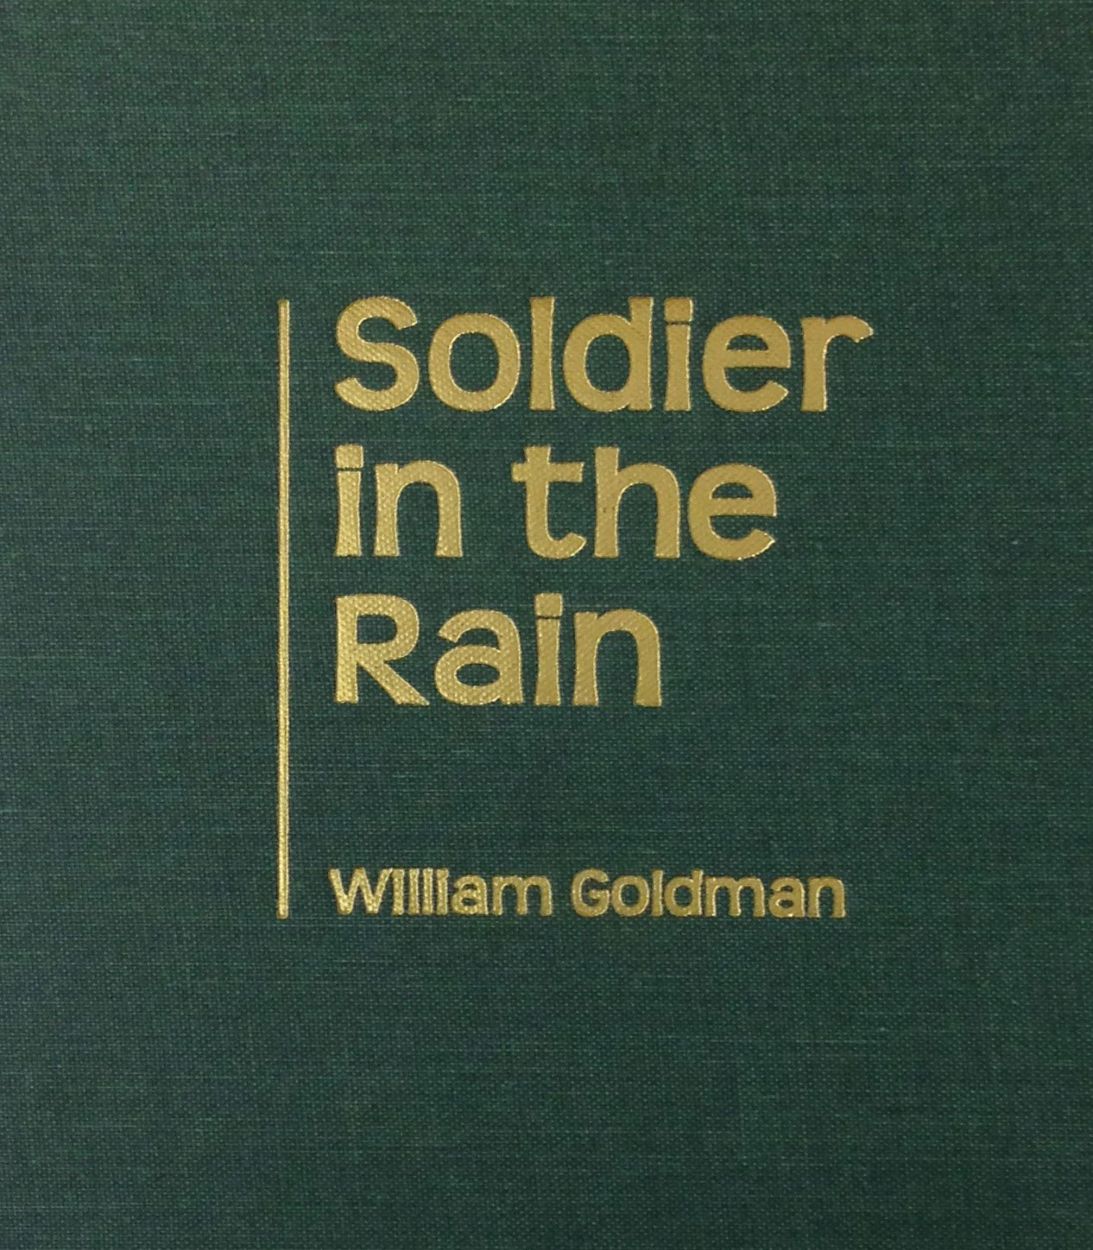 soldier in the rain book cover TLDR vertical